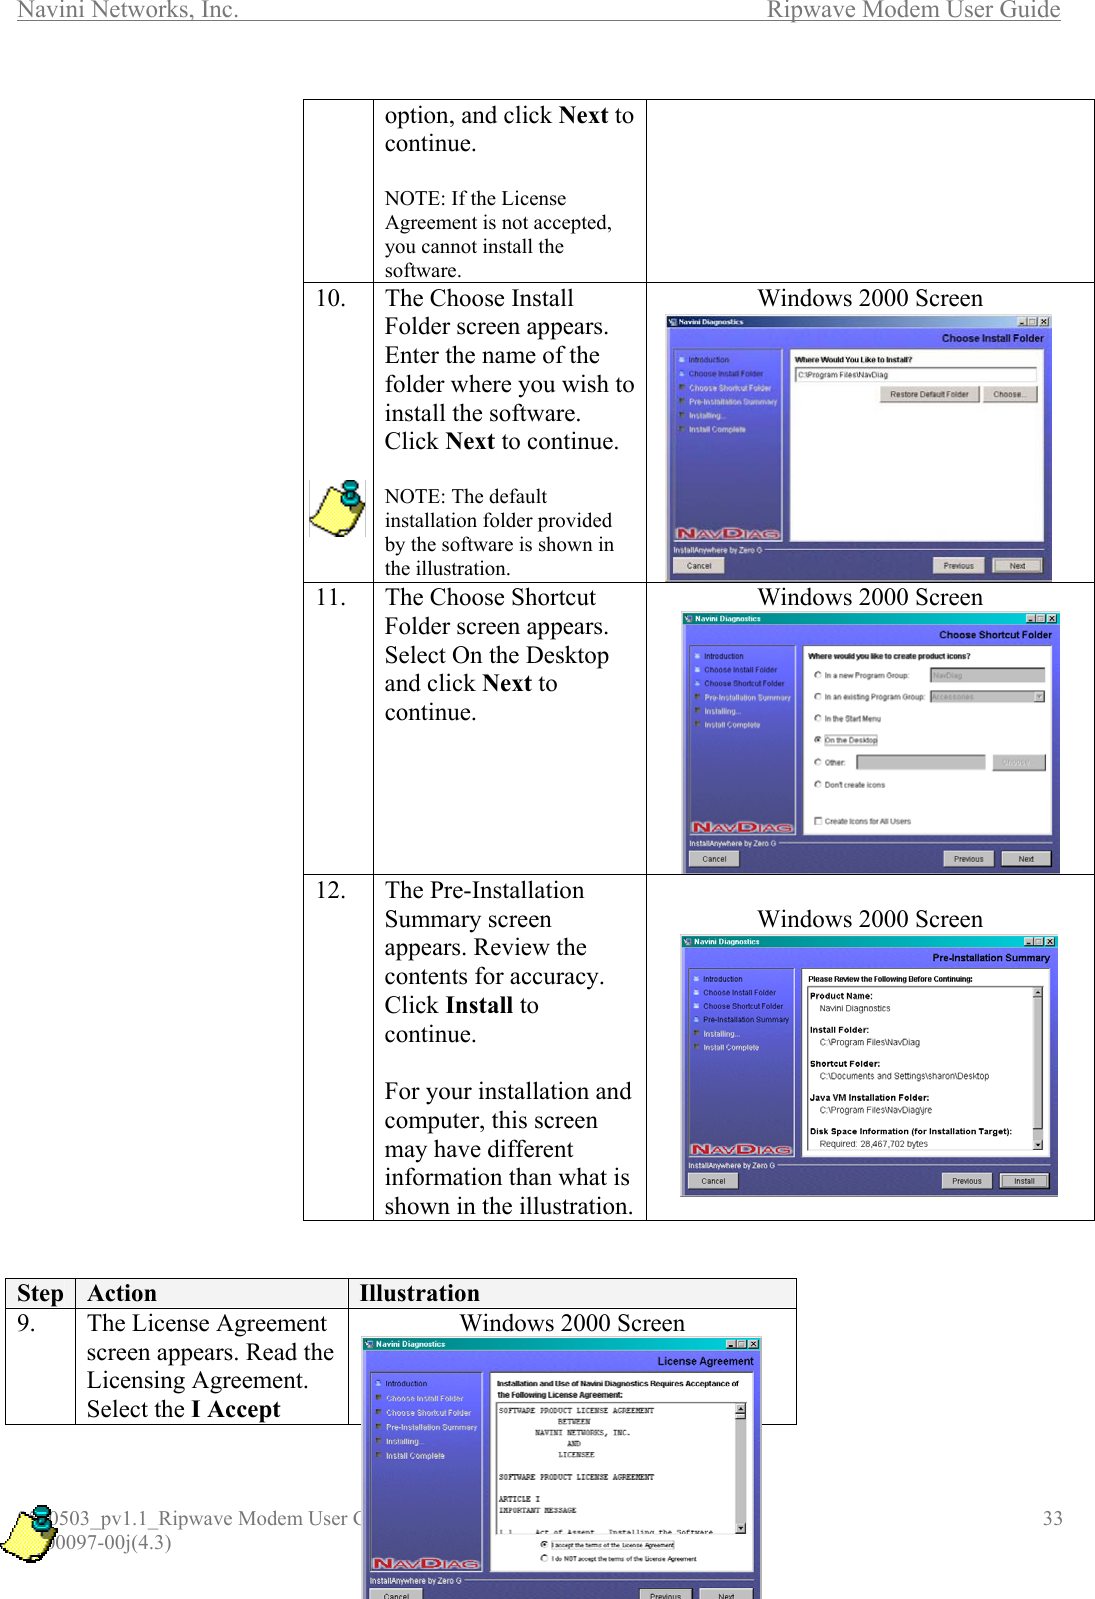 Navini Networks, Inc.        Ripwave Modem User Guide 0500503_pv1.1_Ripwave Modem User Guide  _                                    33 40-00097-00j(4.3)                                          Step  Action  Illustration 9.  The License Agreement screen appears. Read the Licensing Agreement. Select the I Accept Windows 2000 Screen  option, and click Next to continue.  NOTE: If the License Agreement is not accepted, you cannot install the software. 10.  The Choose Install Folder screen appears. Enter the name of the folder where you wish to install the software. Click Next to continue.  NOTE: The default installation folder provided by the software is shown in the illustration.  Windows 2000 Screen  11.  The Choose Shortcut Folder screen appears. Select On the Desktop and click Next to continue. Windows 2000 Screen  12. The Pre-Installation Summary screen appears. Review the contents for accuracy. Click Install to continue.   For your installation and computer, this screen may have different information than what is shown in the illustration. Windows 2000 Screen   